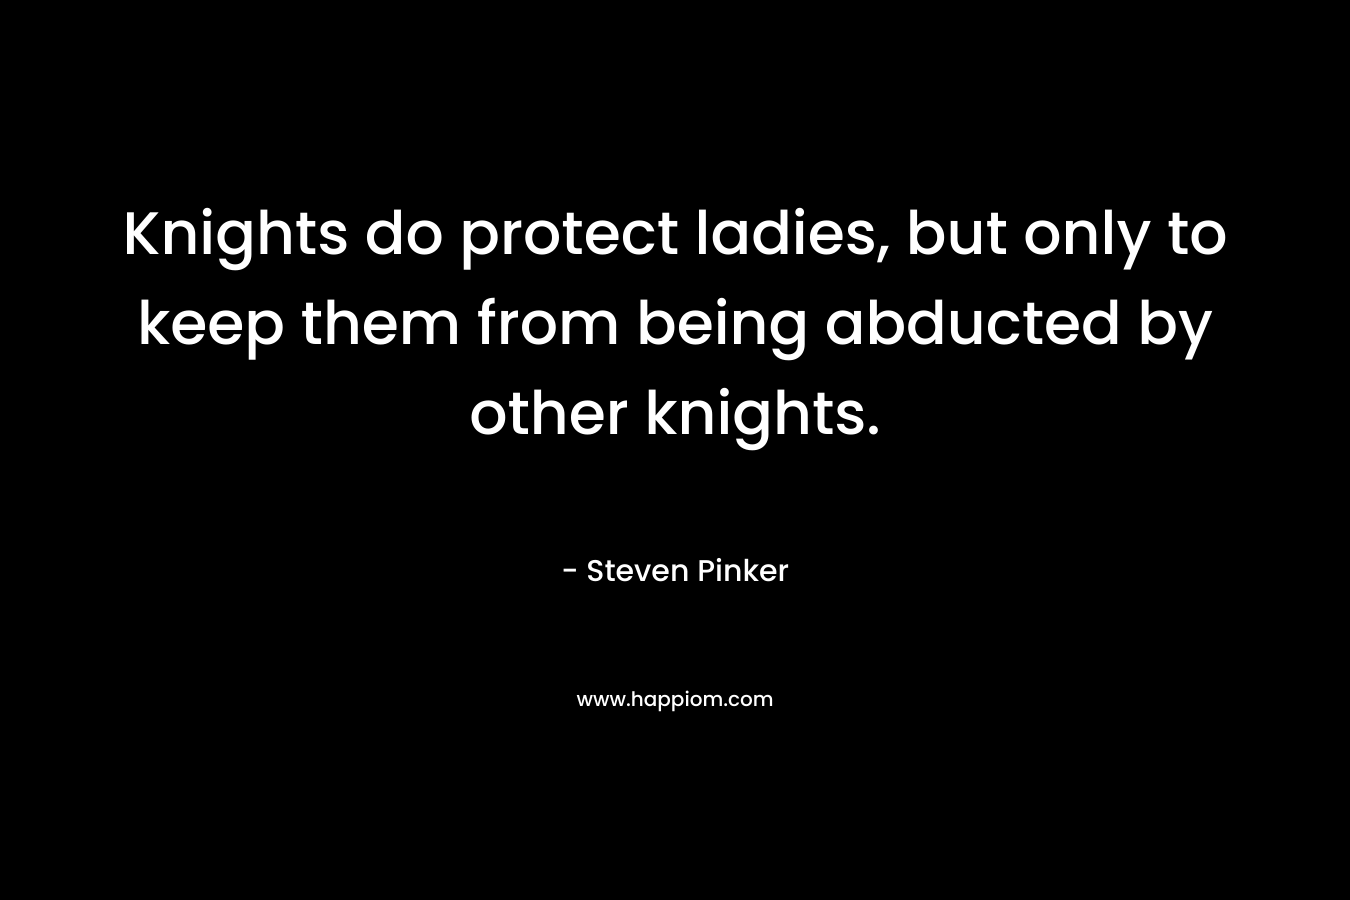 Knights do protect ladies, but only to keep them from being abducted by other knights.